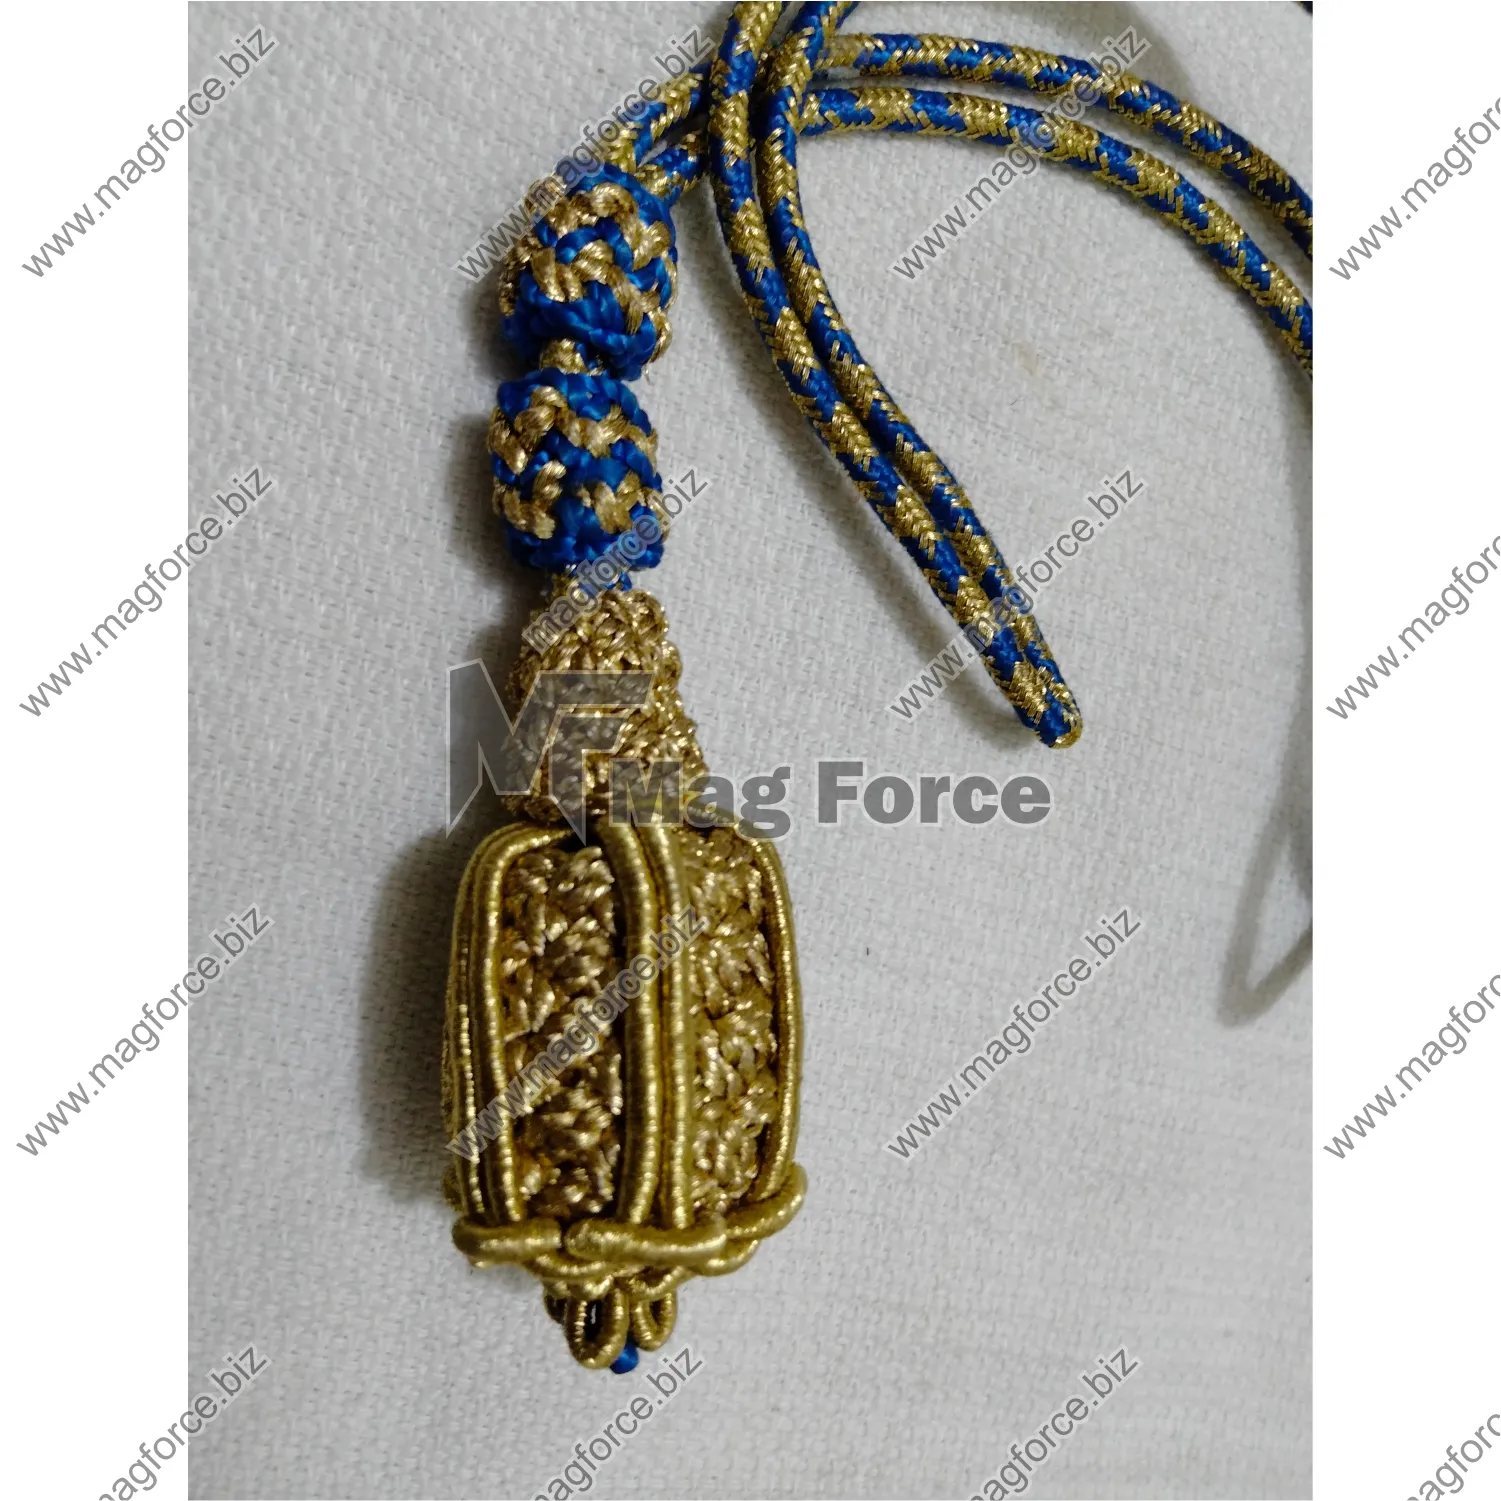 High Quality Sword Knot Bullion Wire Made in Two Color Uniform Accessories Officer Sword Knot With Customized Designs